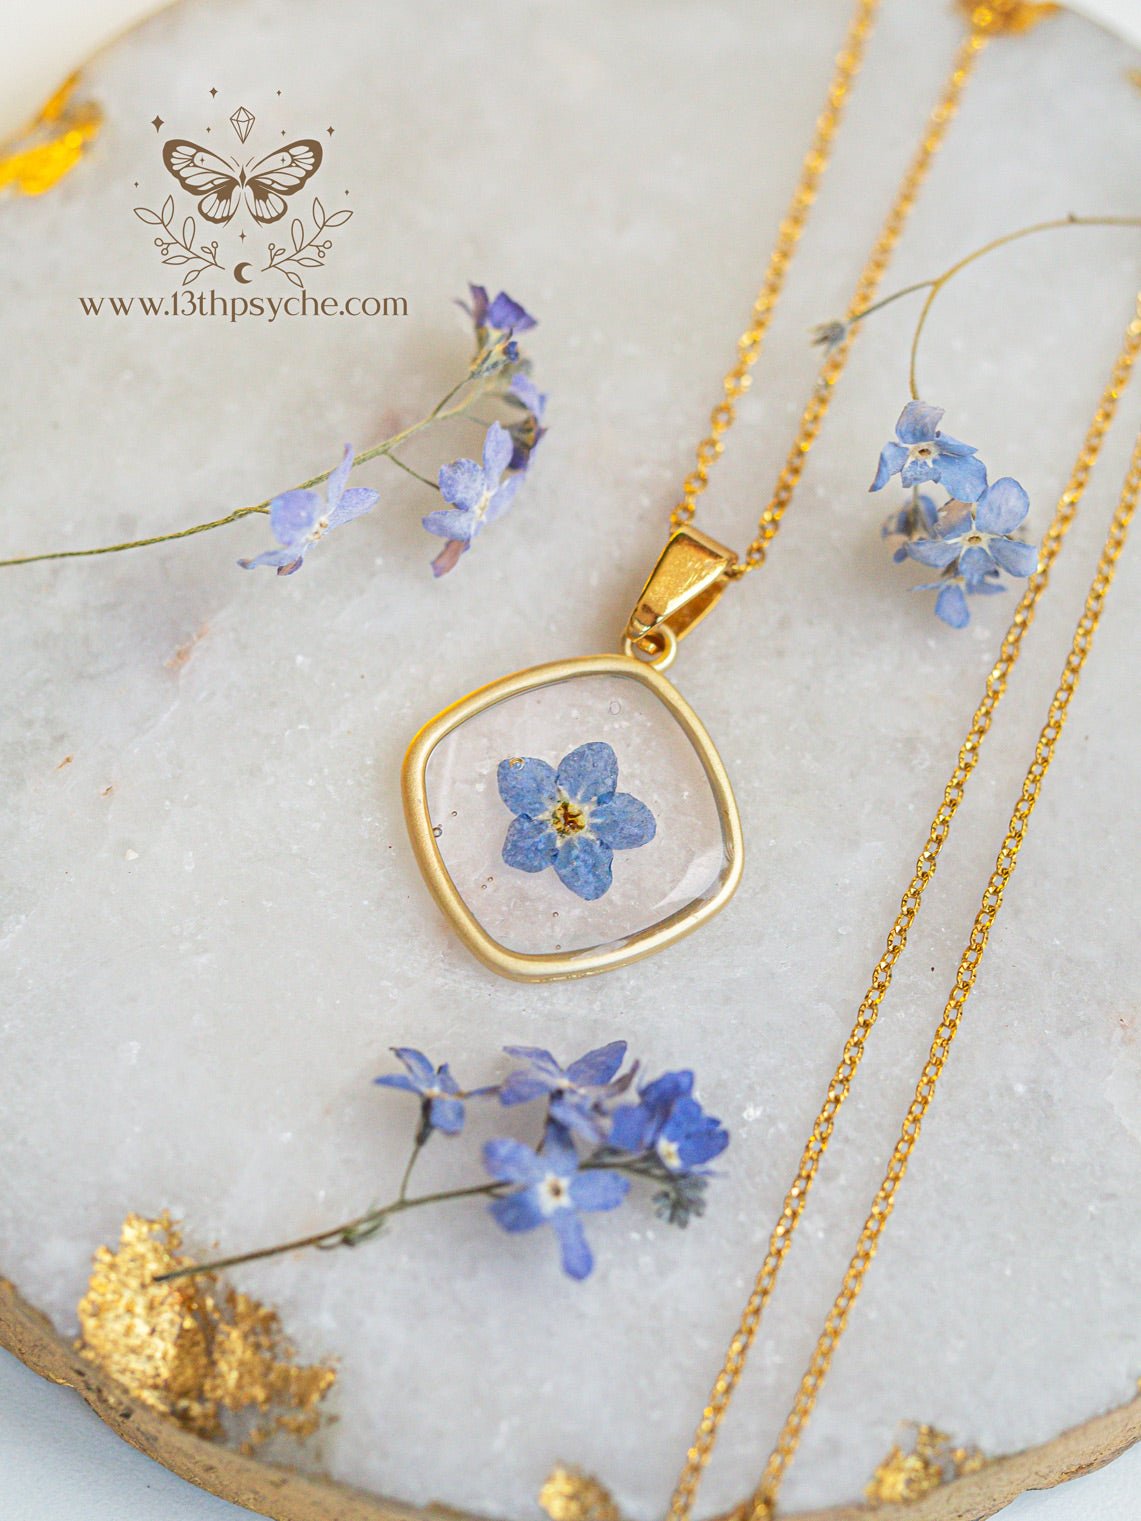 Summer Blooms : The Coreopsis Flower Necklace